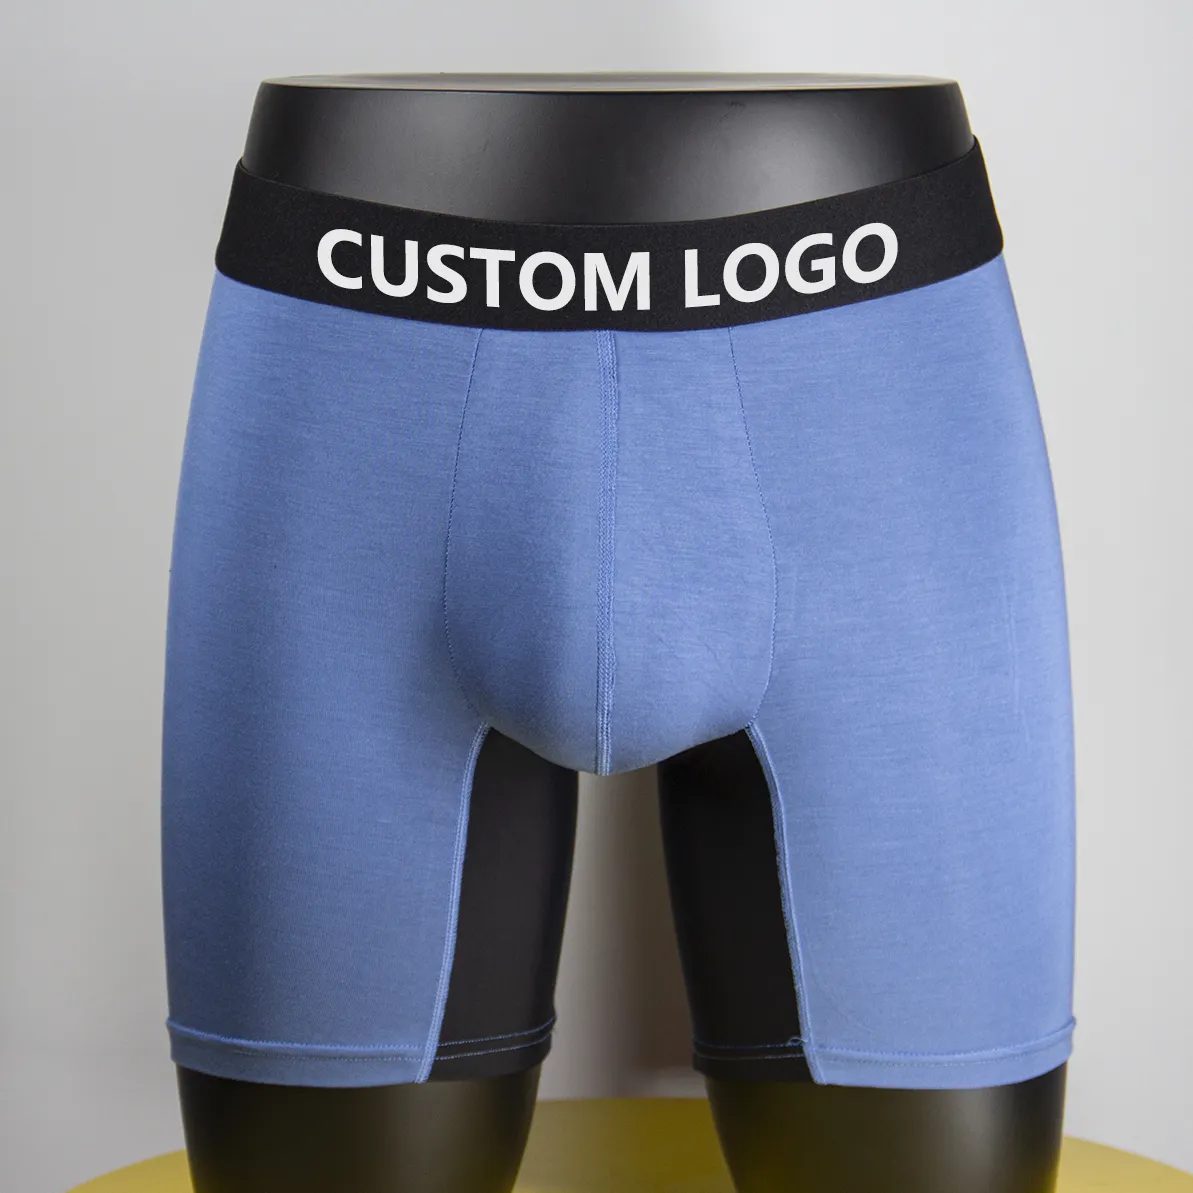 Custom Logo Best Quality Bamboo Underwear With Private Logo Mens Briefs & Boxers Underwear Factory